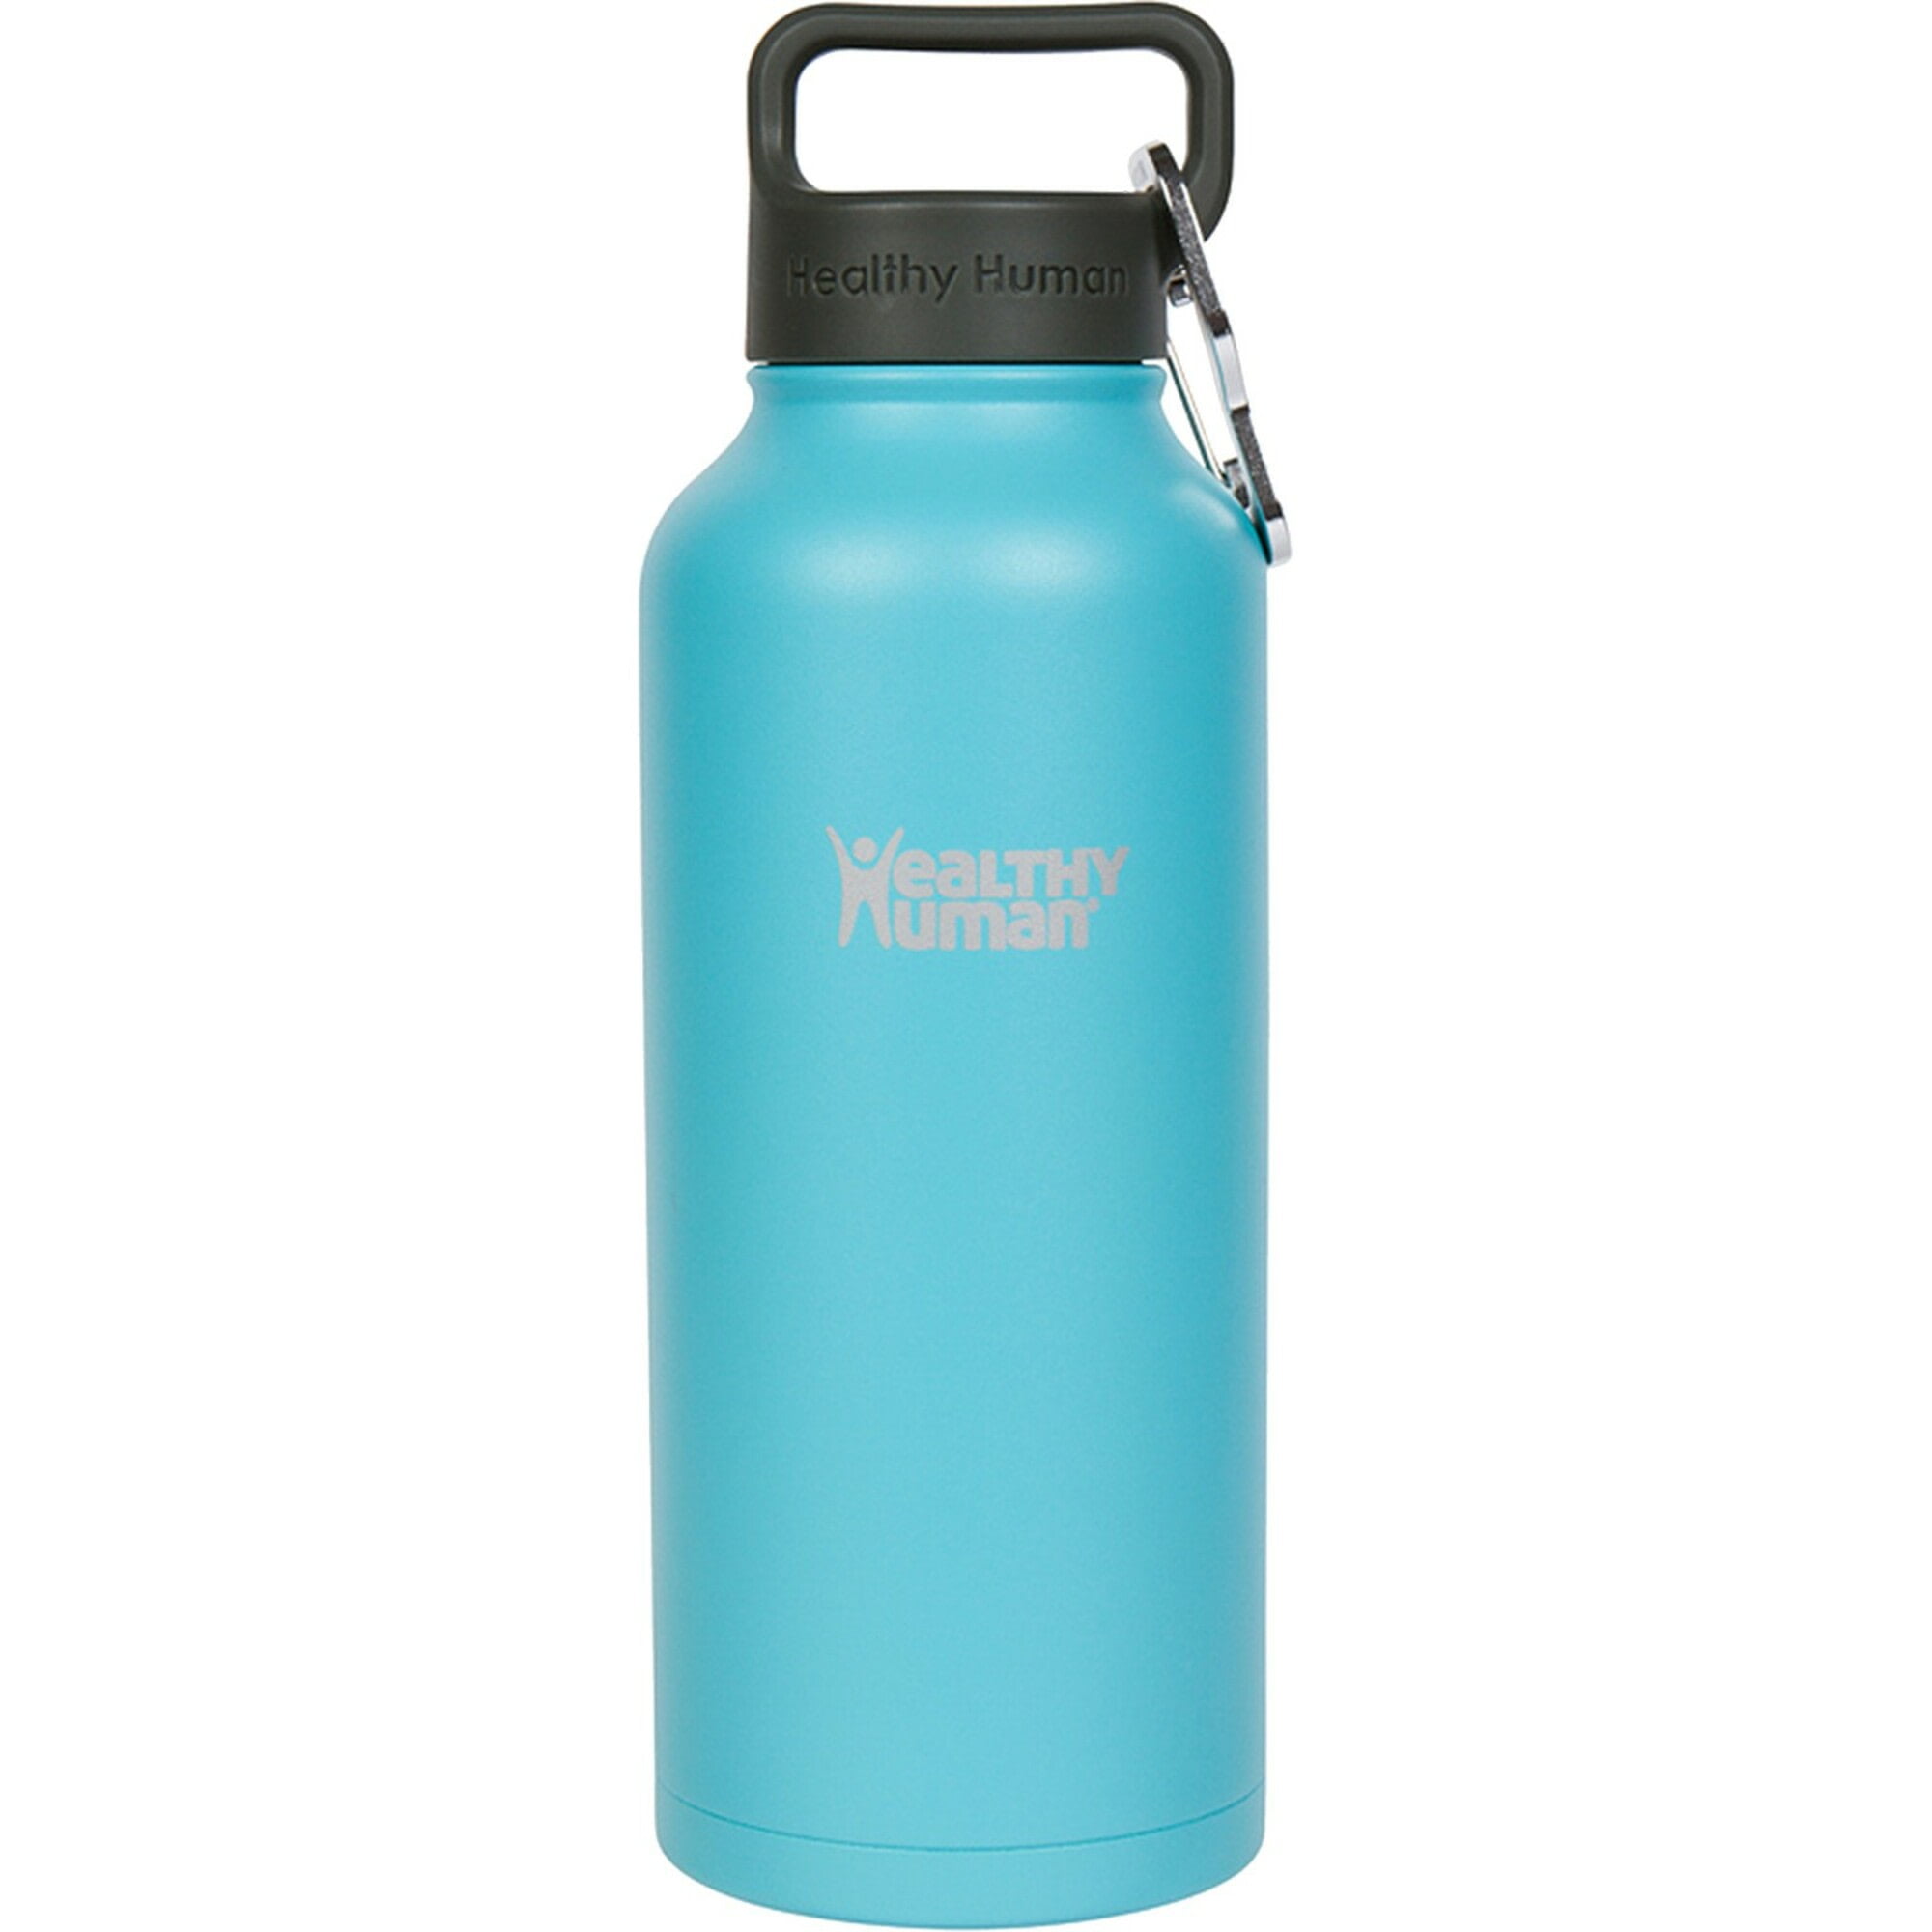 Healthy Human Awards  Top Insulated Water Bottles & Eco Products